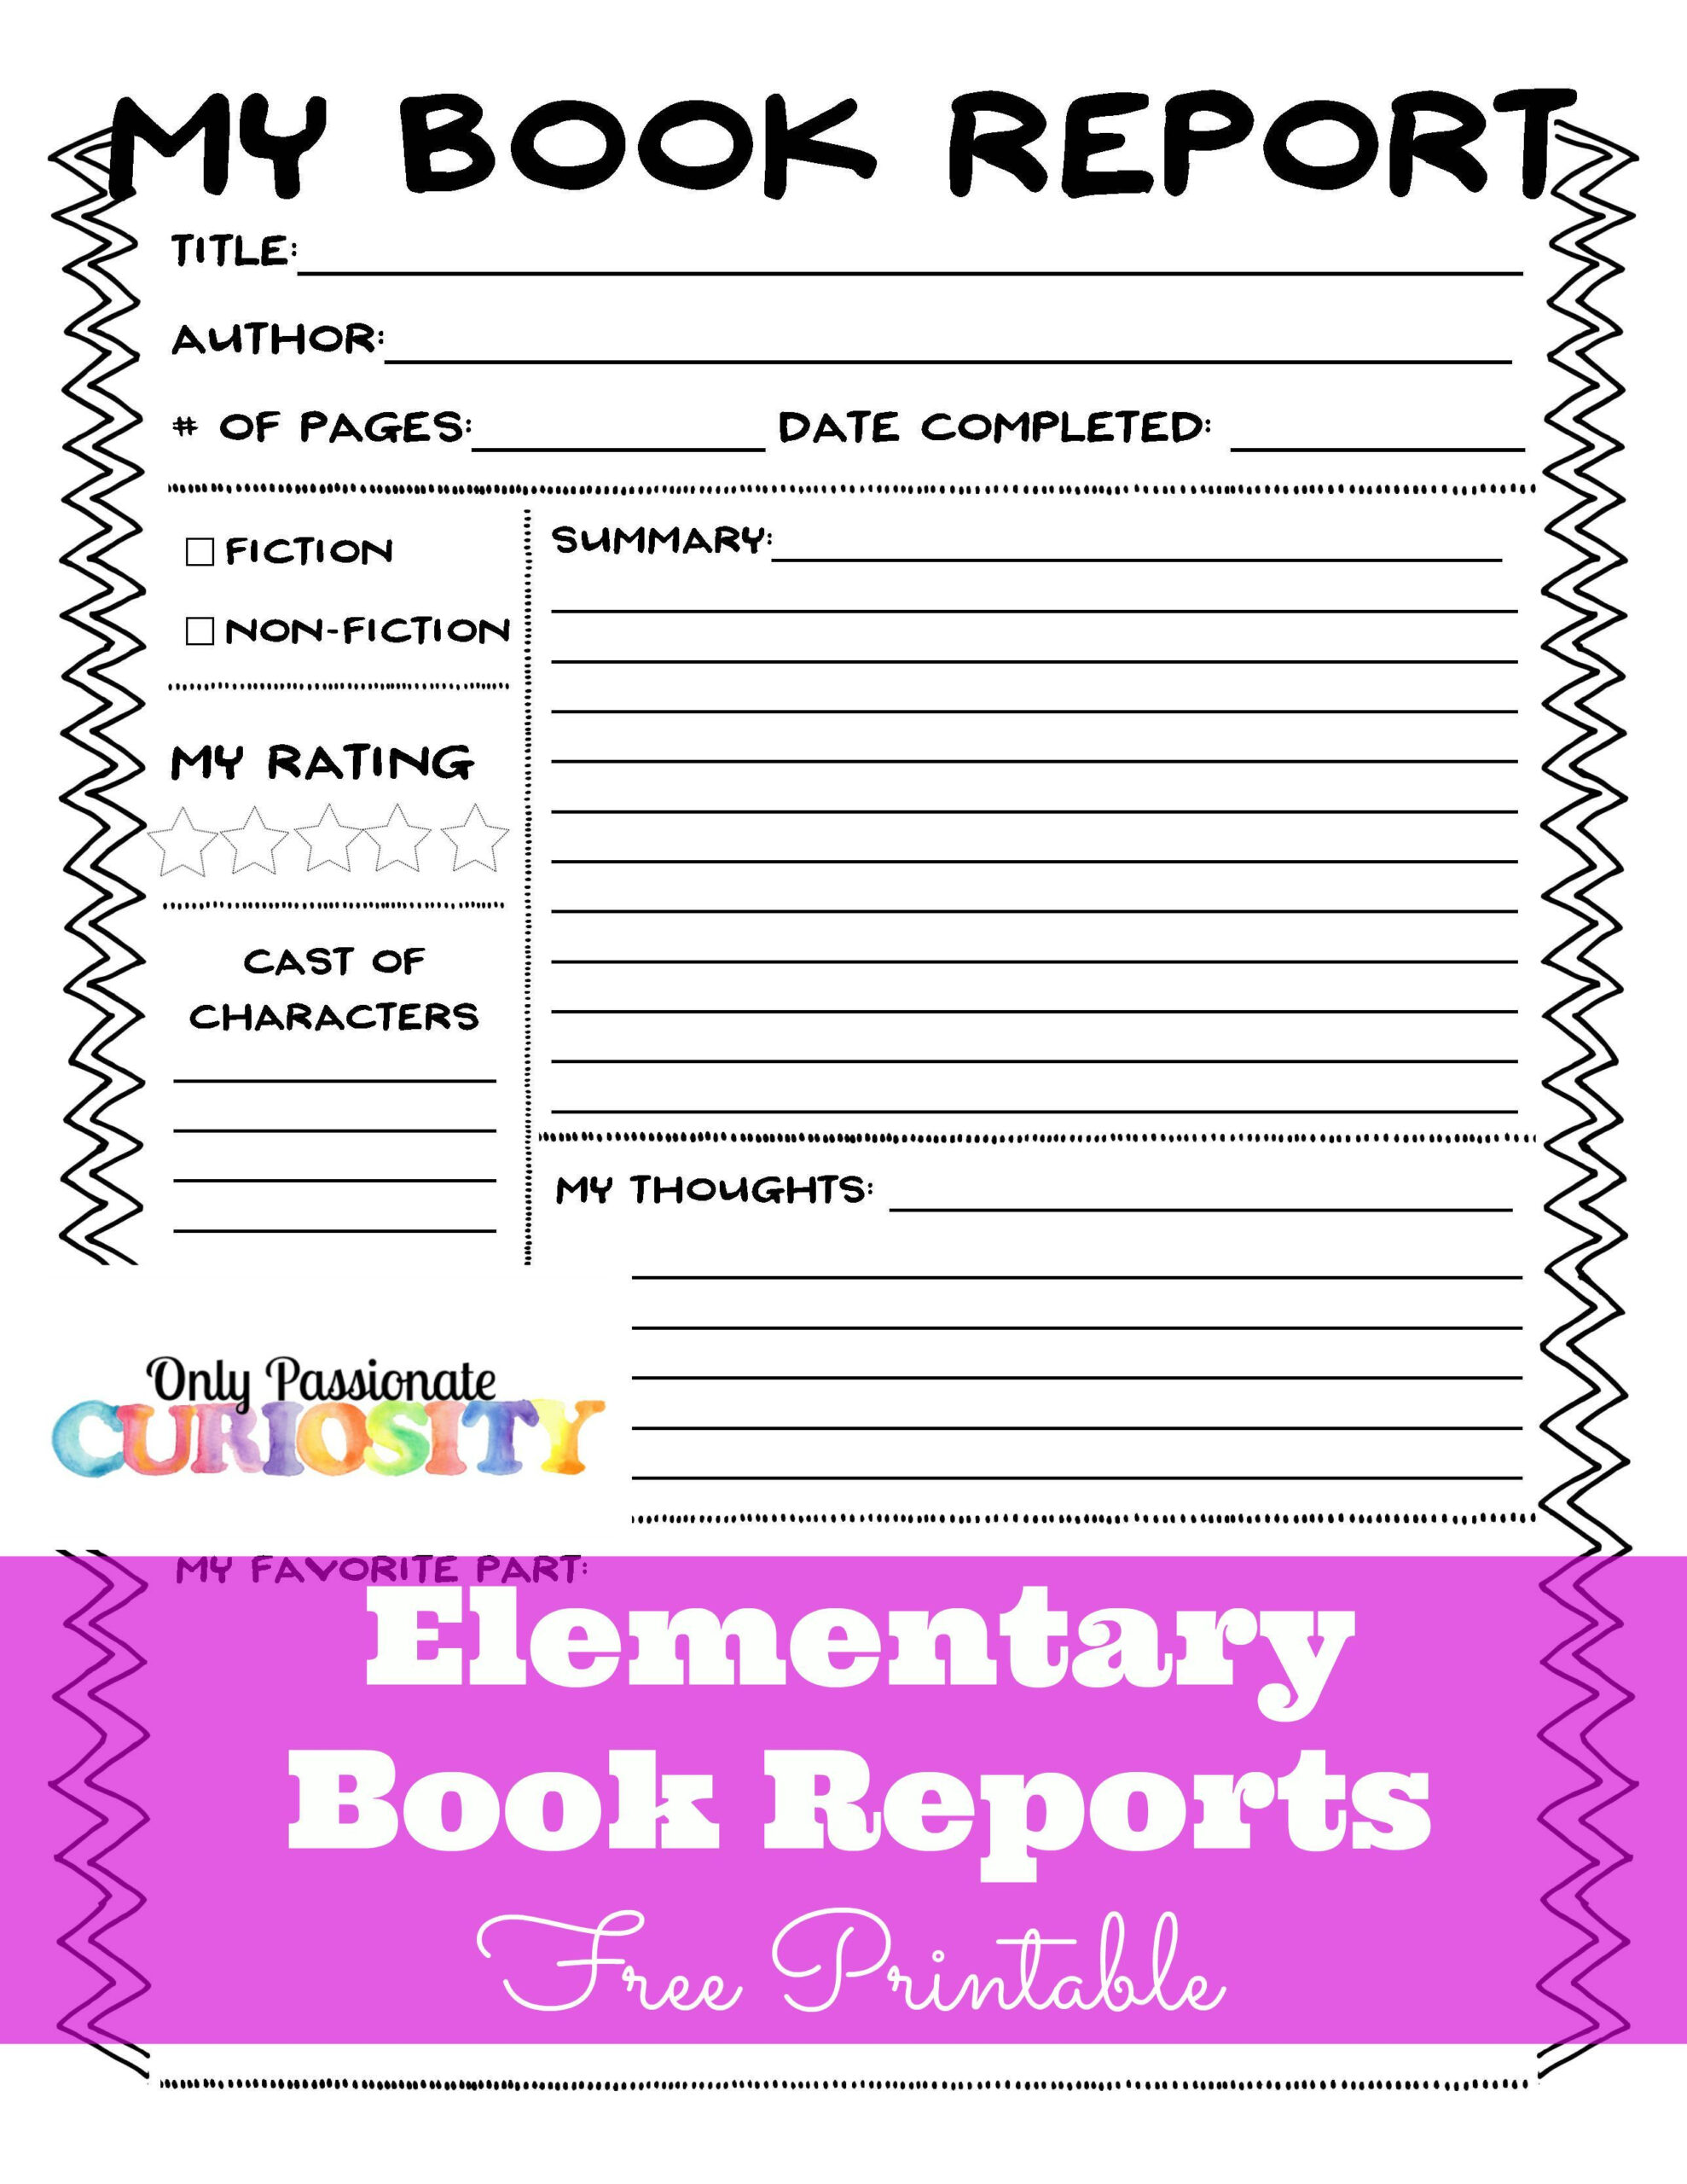 Elementary Book Reports Made Easy | Book Report Templates Intended For Book Report Template In Spanish